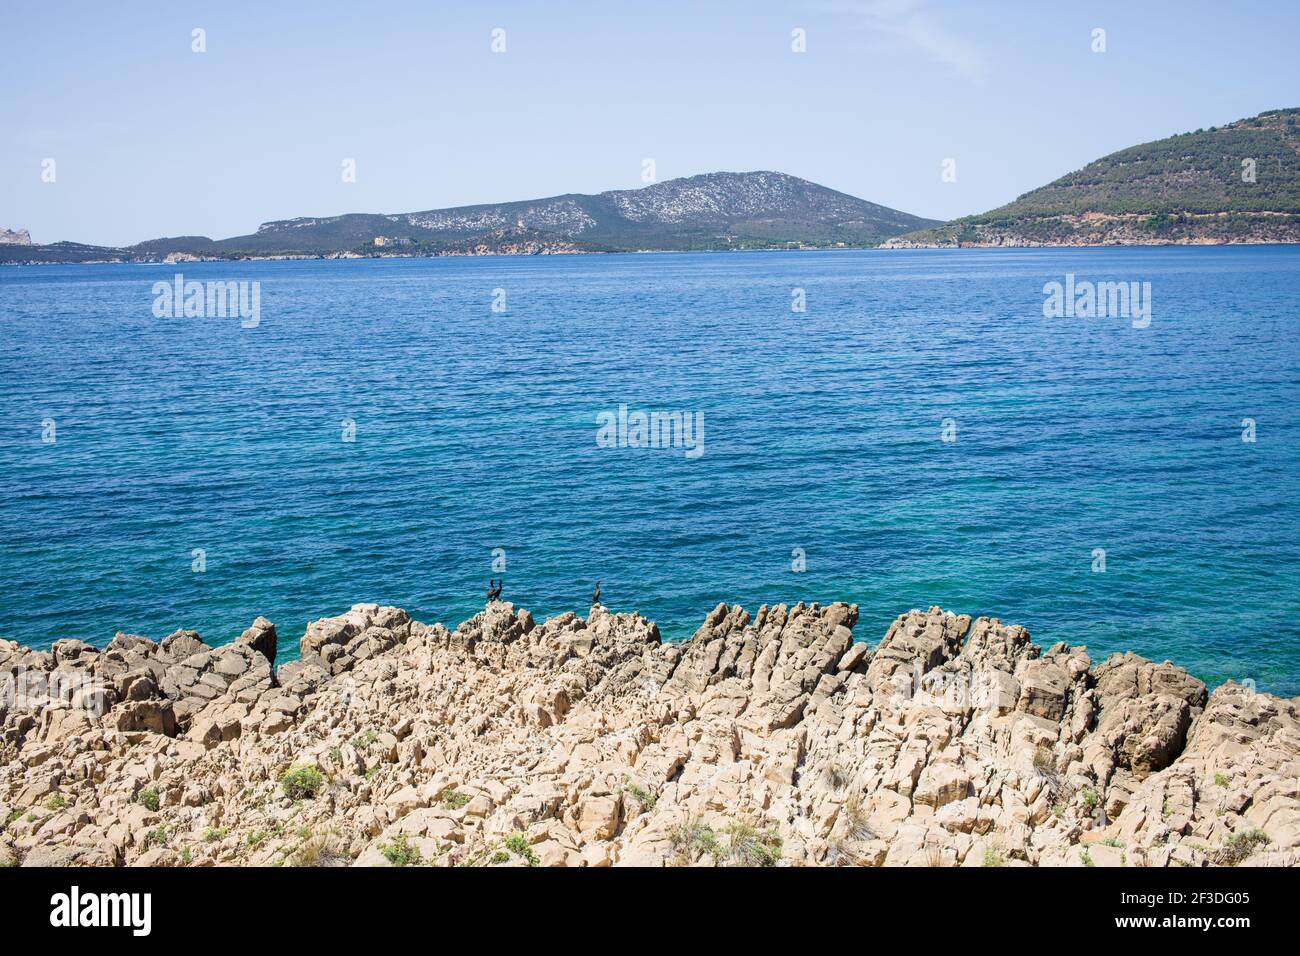 Landscape of Stones and rocks by river with mountains and blue sky in the background Stock Photo